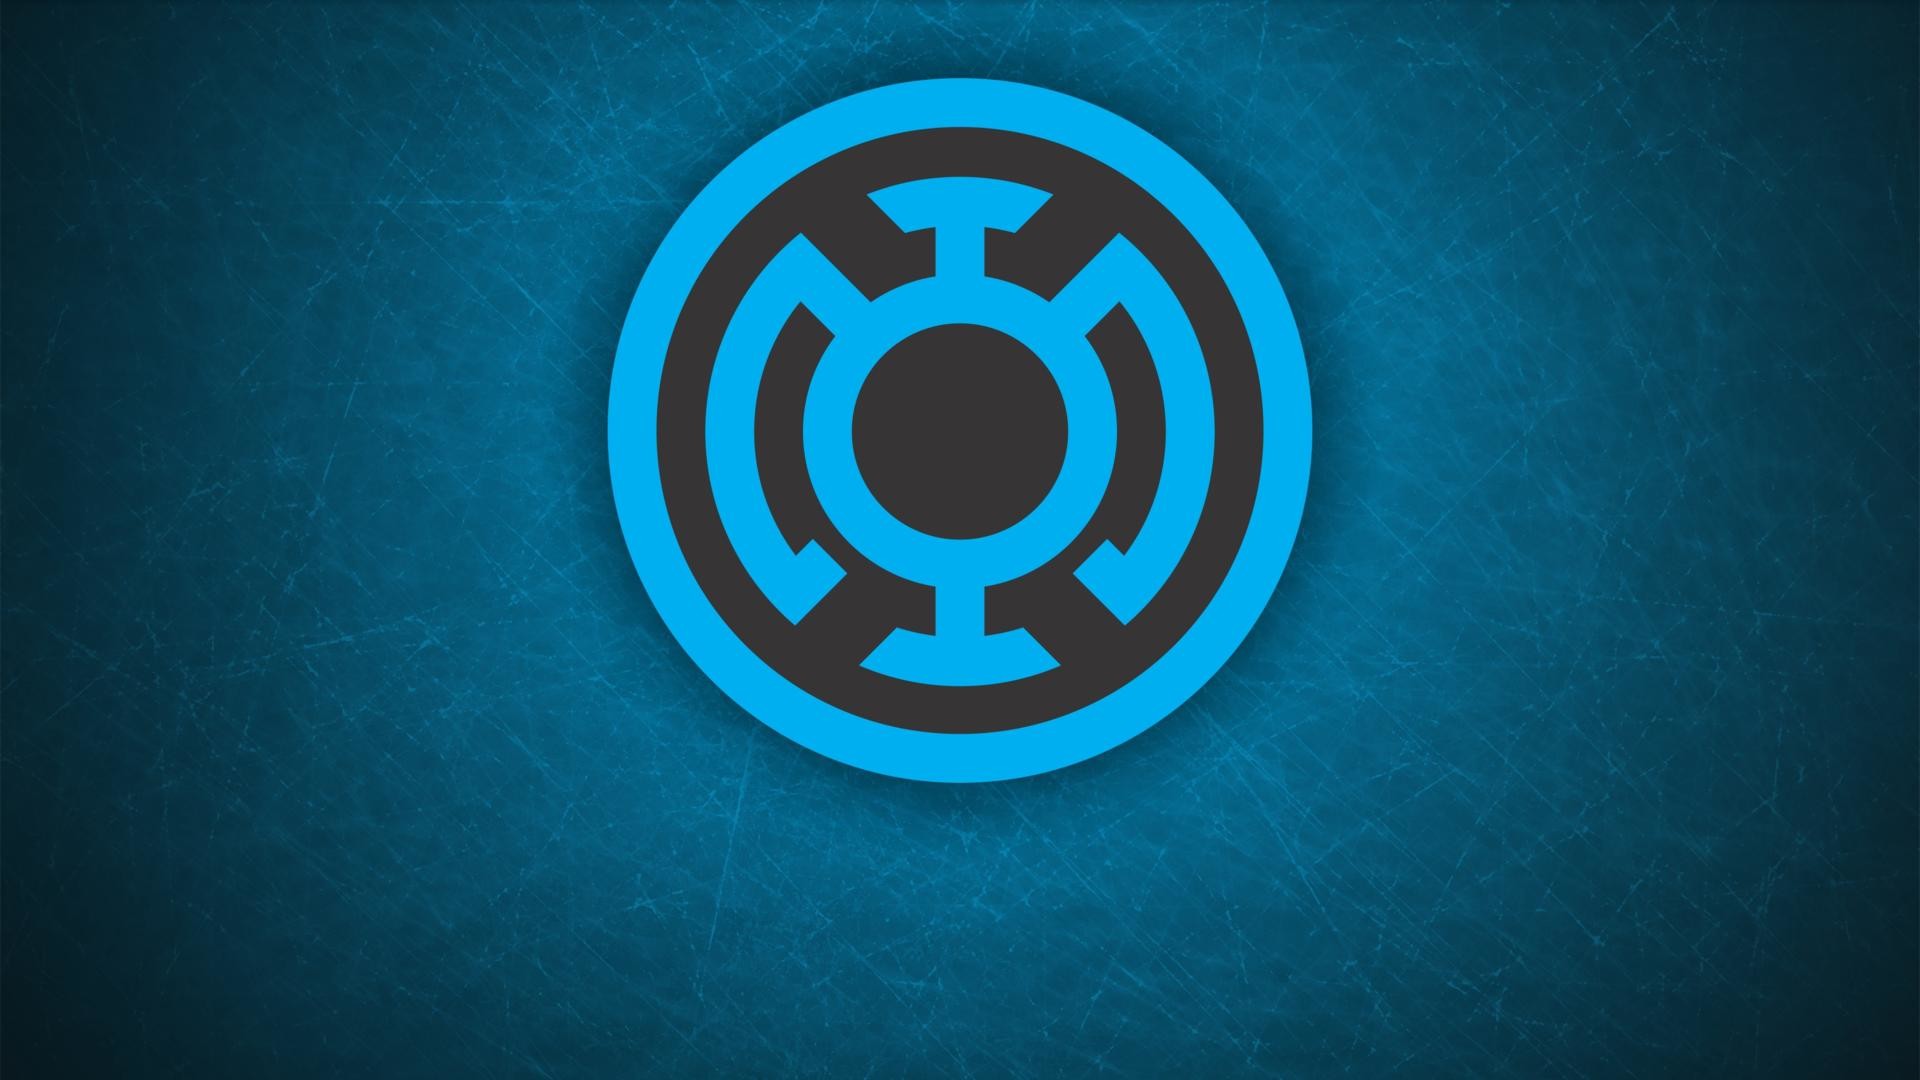 1920x1080 5 Blue Lantern Corps Wallpapers | Blue Lantern Corps Backgrounds